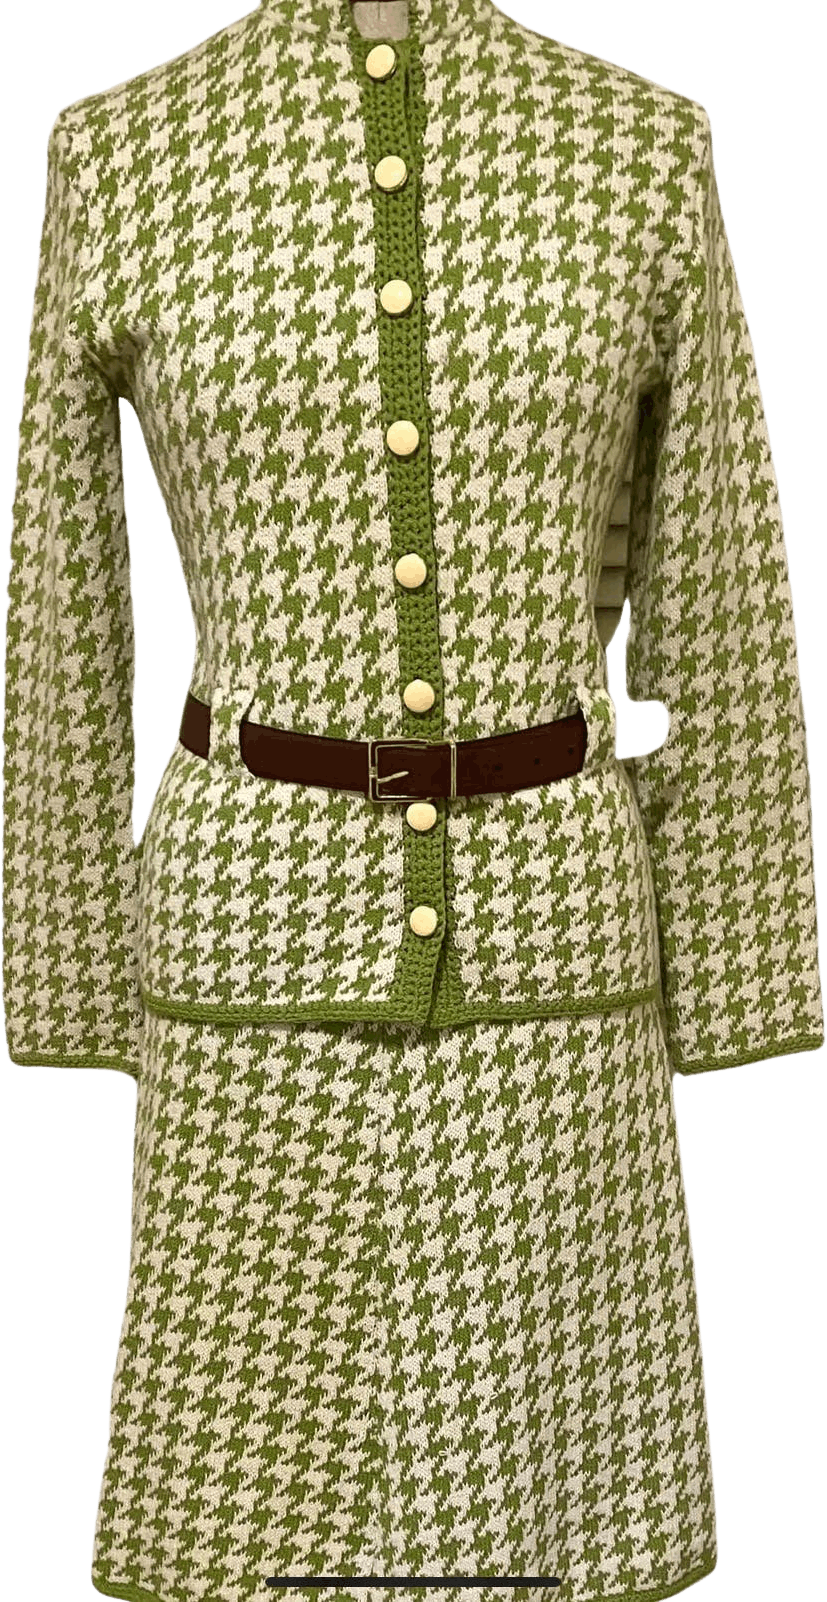 50s/60s Jackie O Kennedy Green Houndstooth Knit Skirt Suit By St. John's Knits